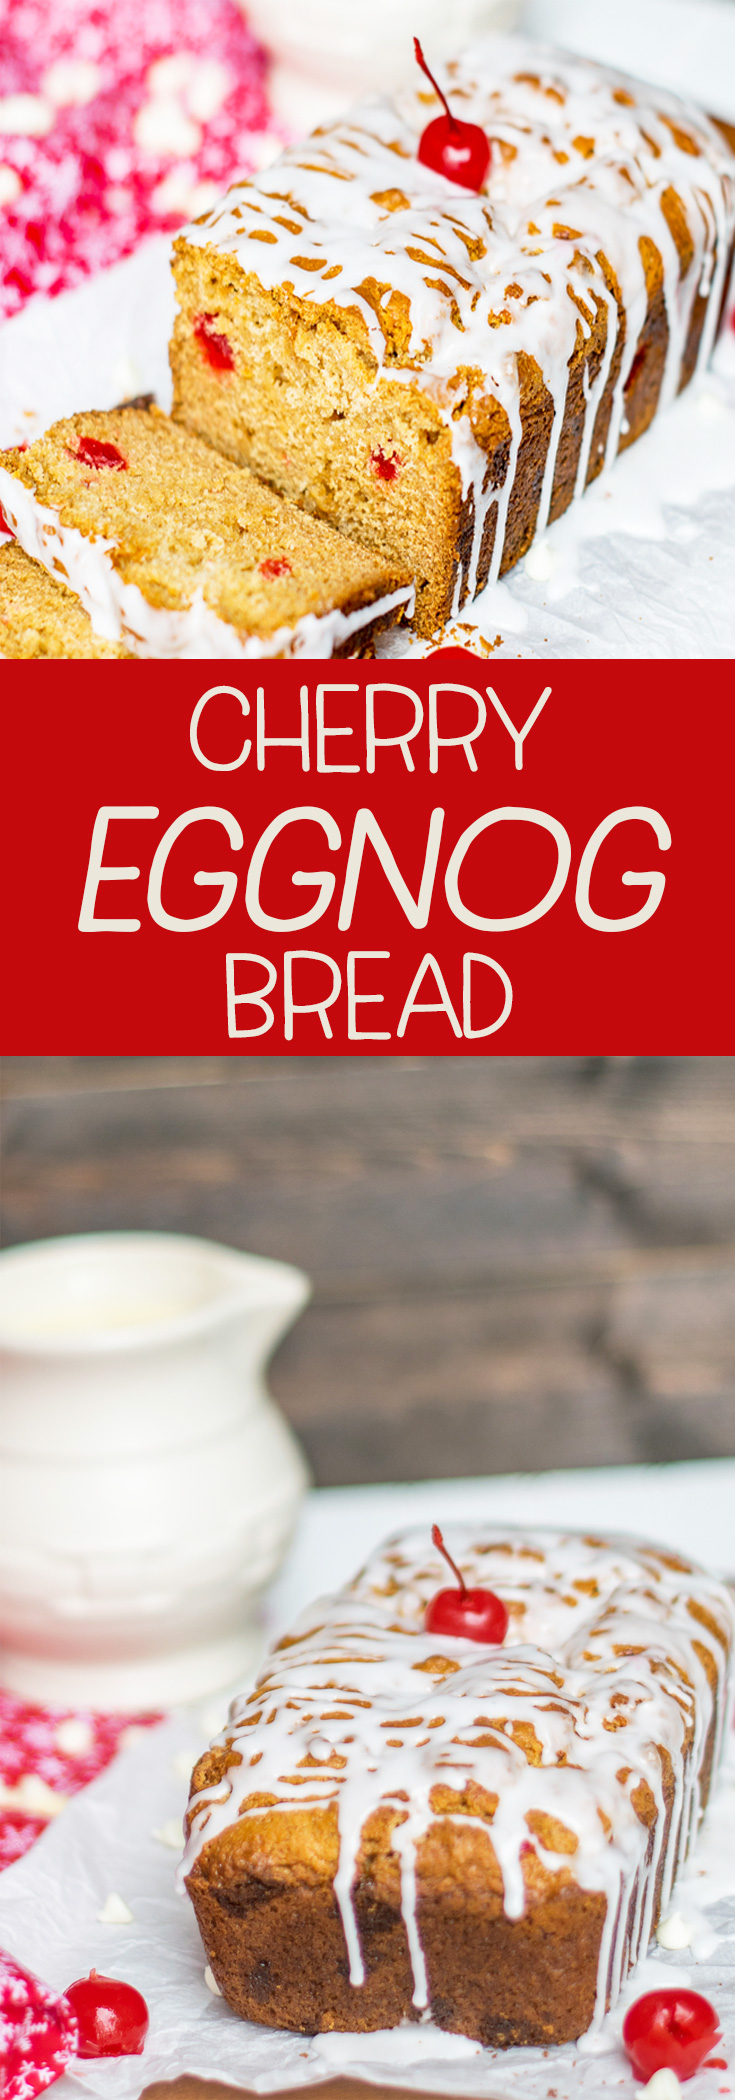 Put a cherry on it! This easy quick bread will satisfy your holiday sweet tooth! White Chocolate Cherry Eggnog Quick Bread will be a holiday favorite! #Holidayrecipes #eggnog #quickbread #cherry #Christmasfood via @mrsmajorhoff